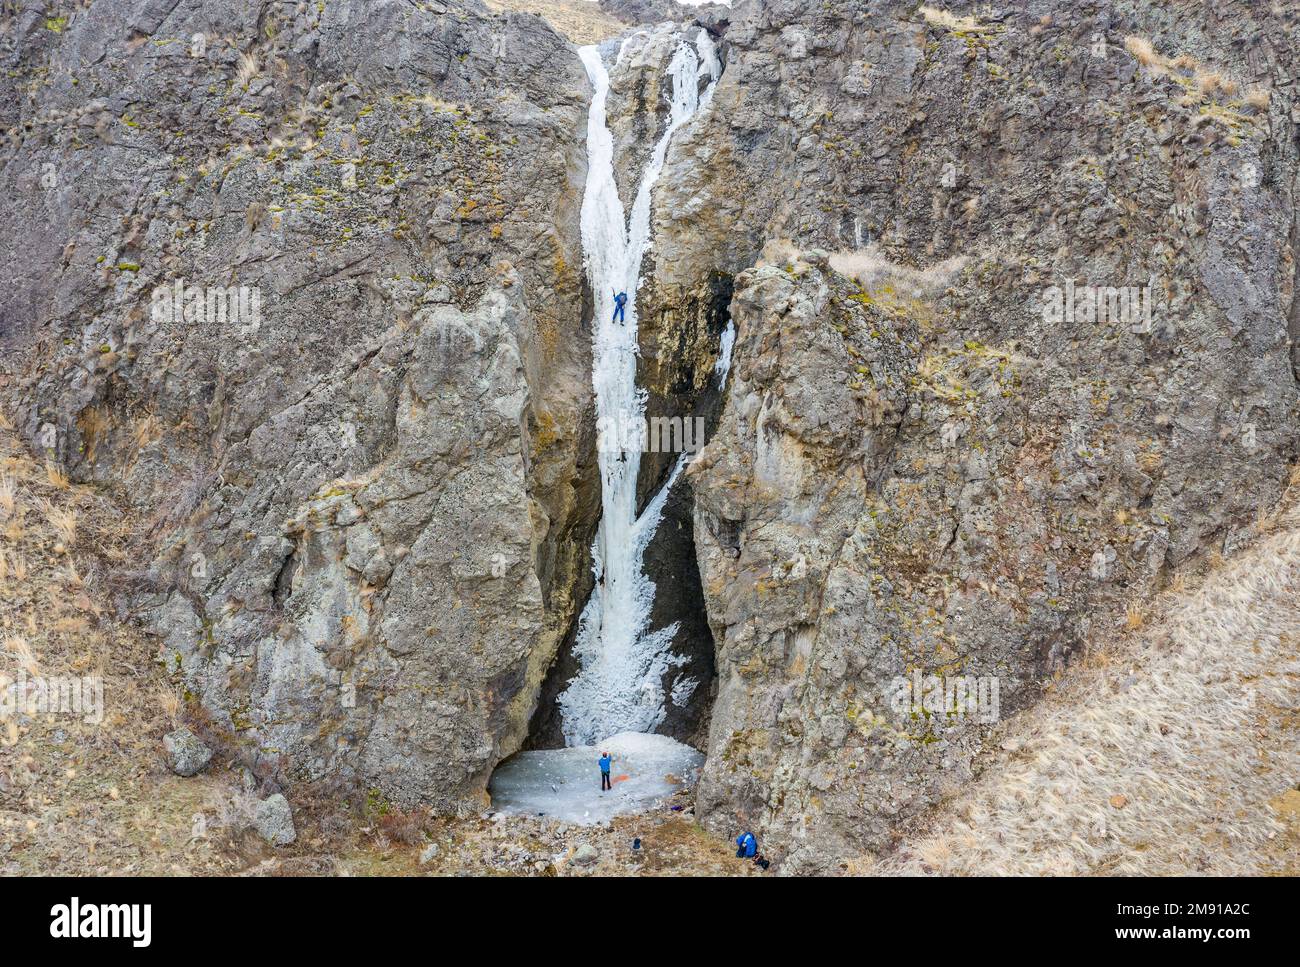 Ice climbers on a route called Kettle Falls Idaho Stock Photo